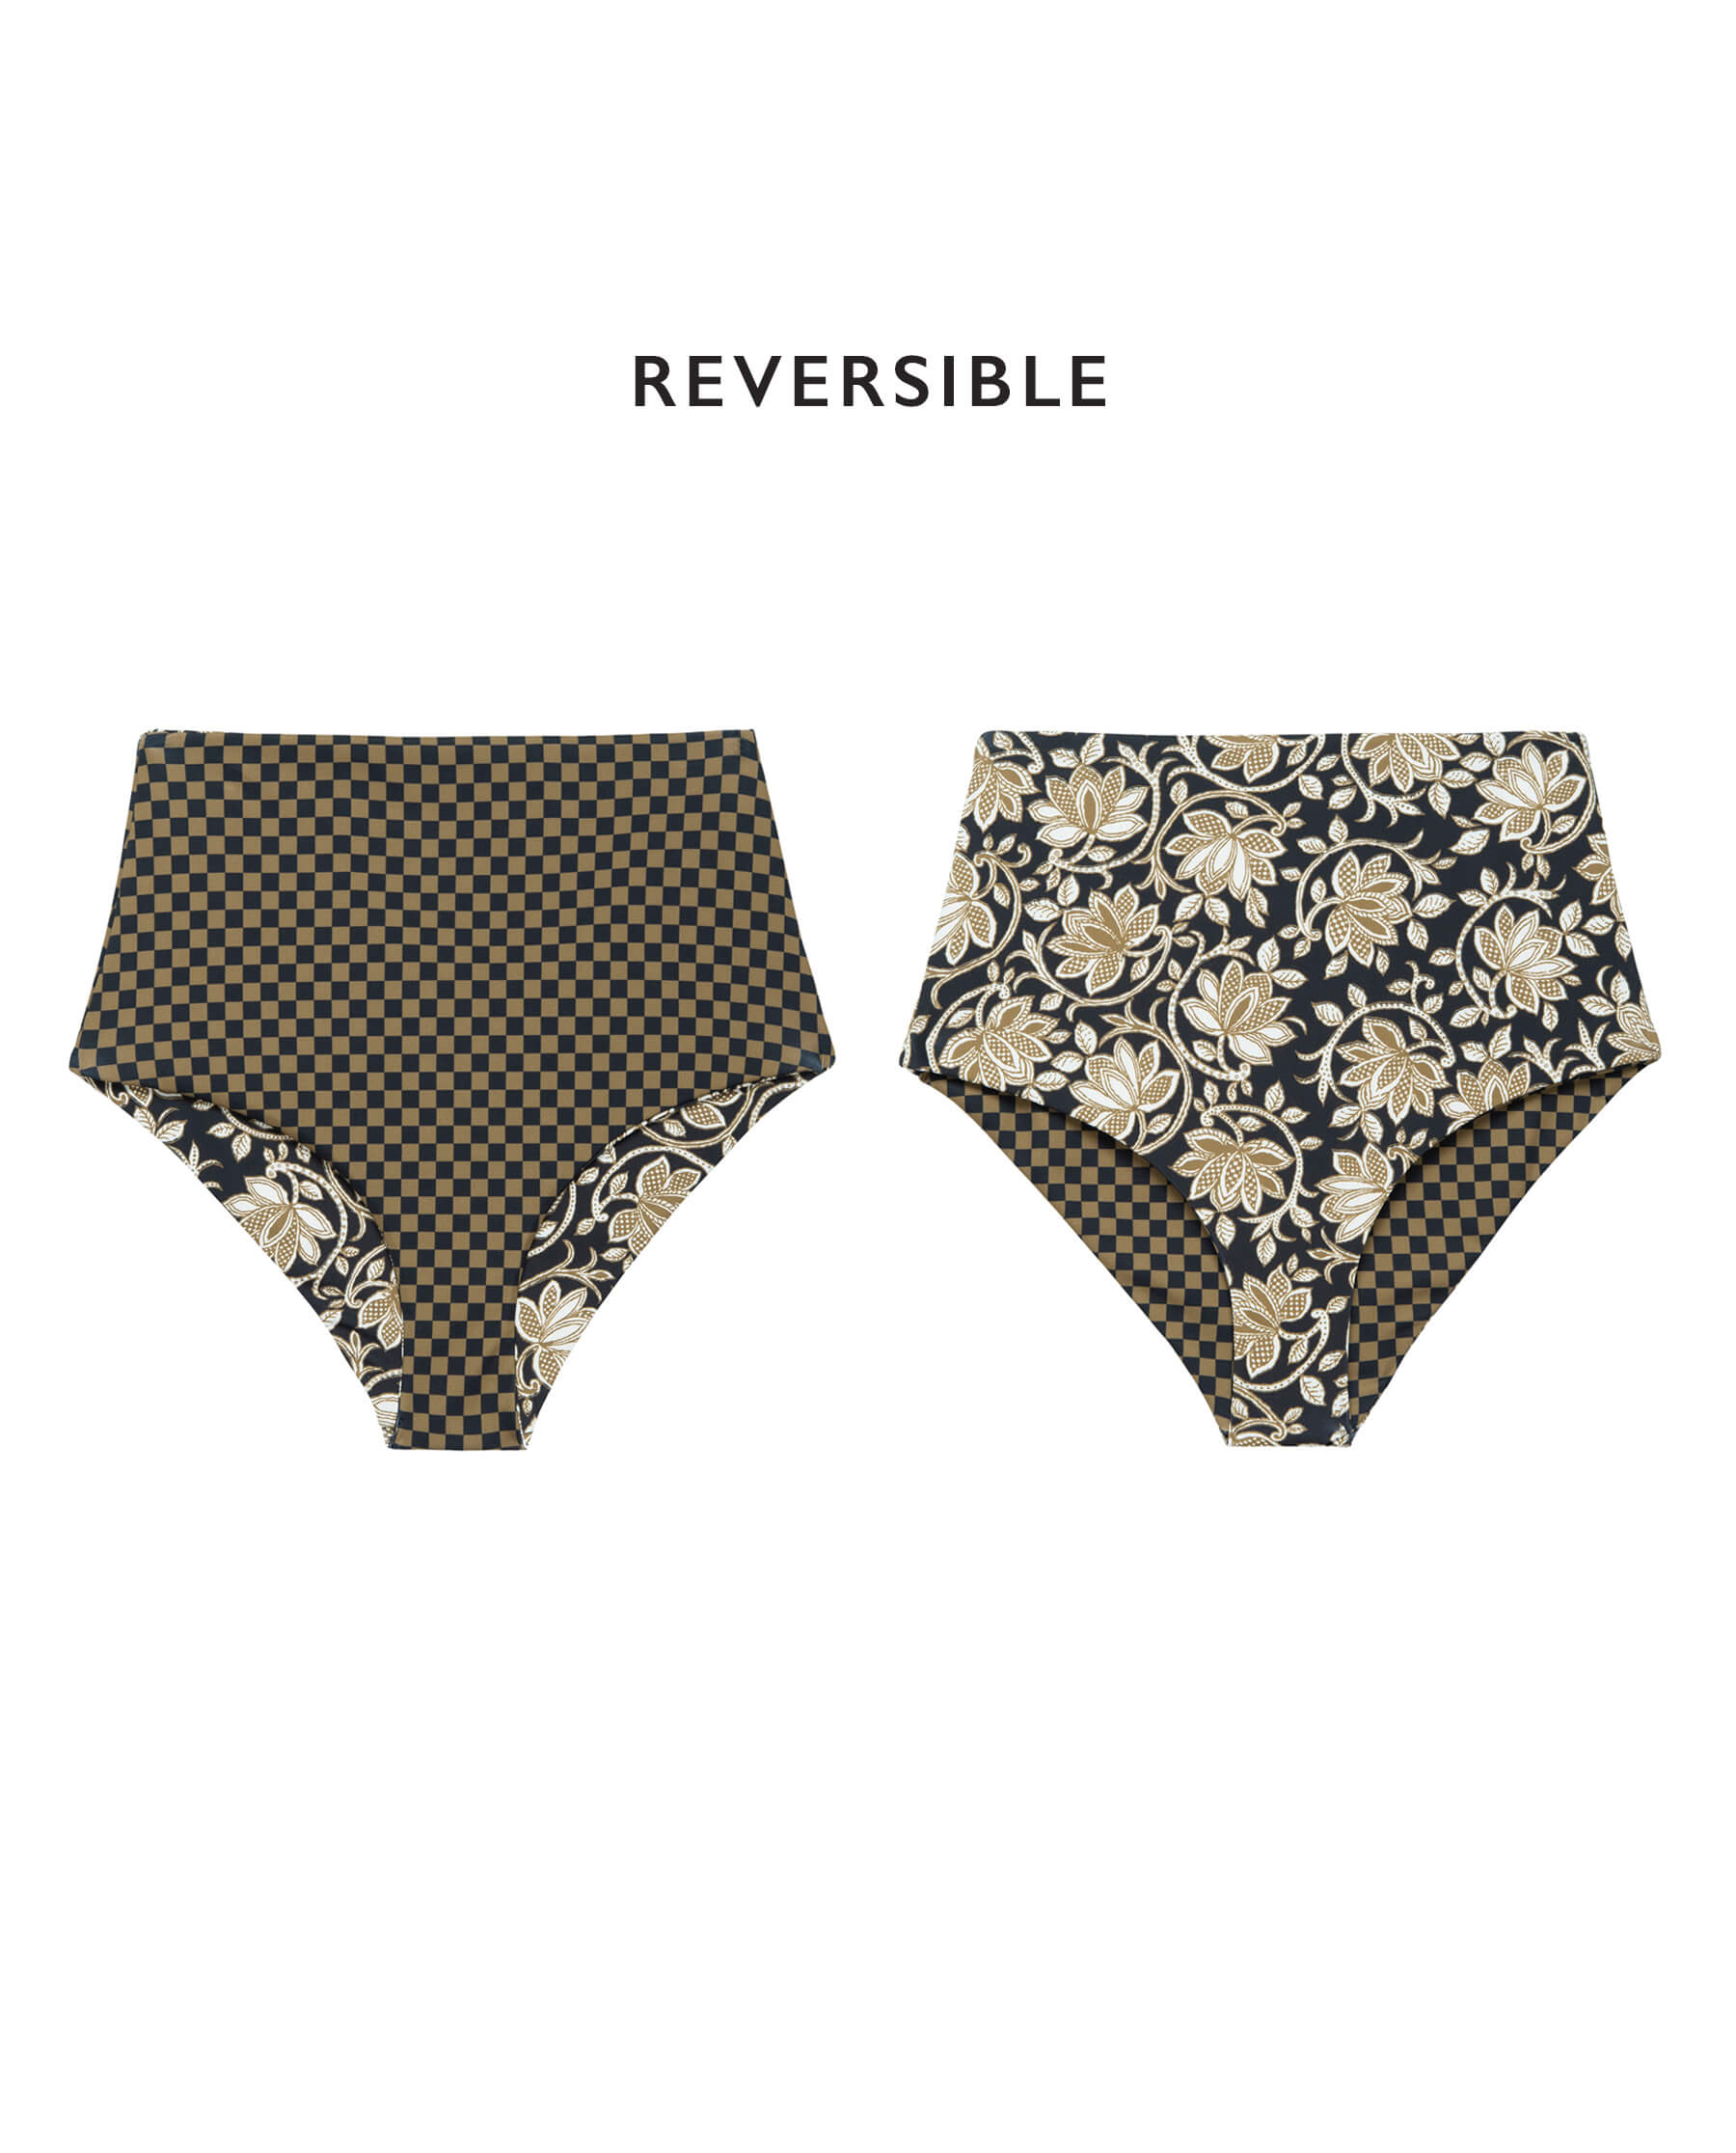 The Reversible Mid Rise Brief